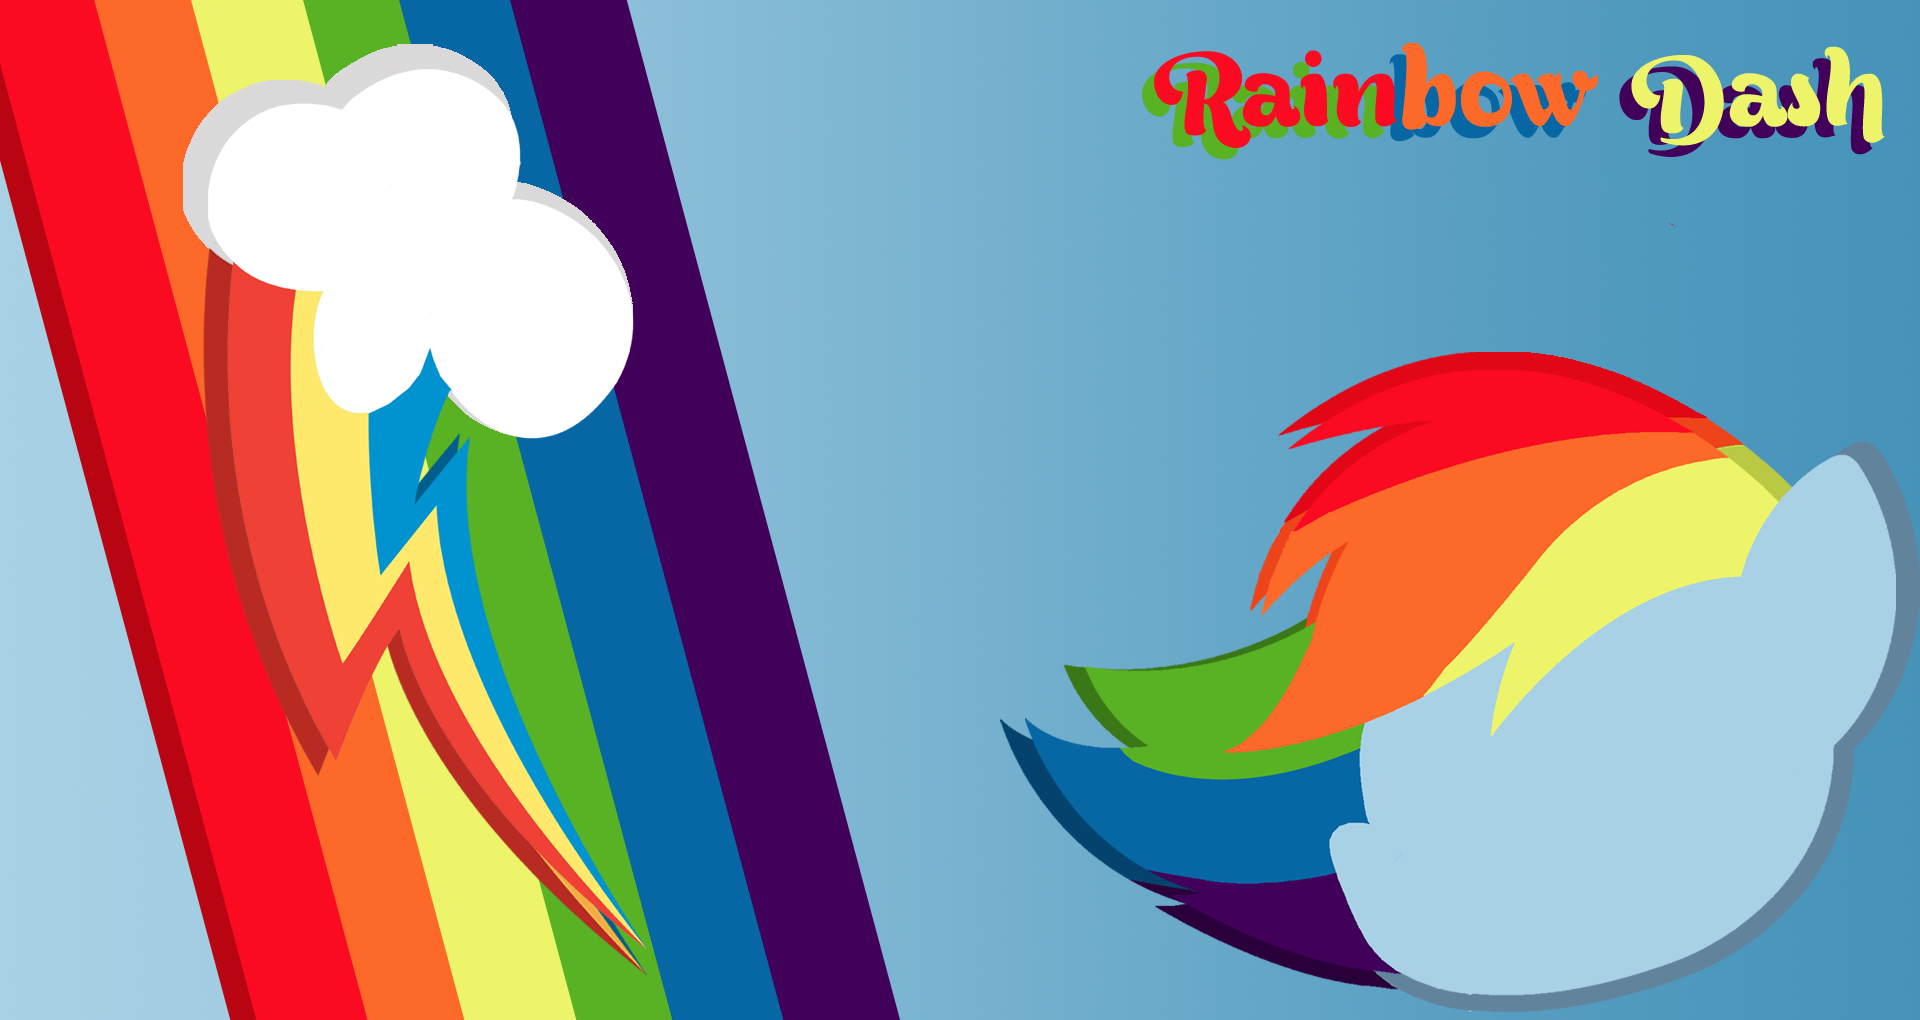 Rainbow Dash Minimalistic wallpaper by BlackGryph0n and TomA62975